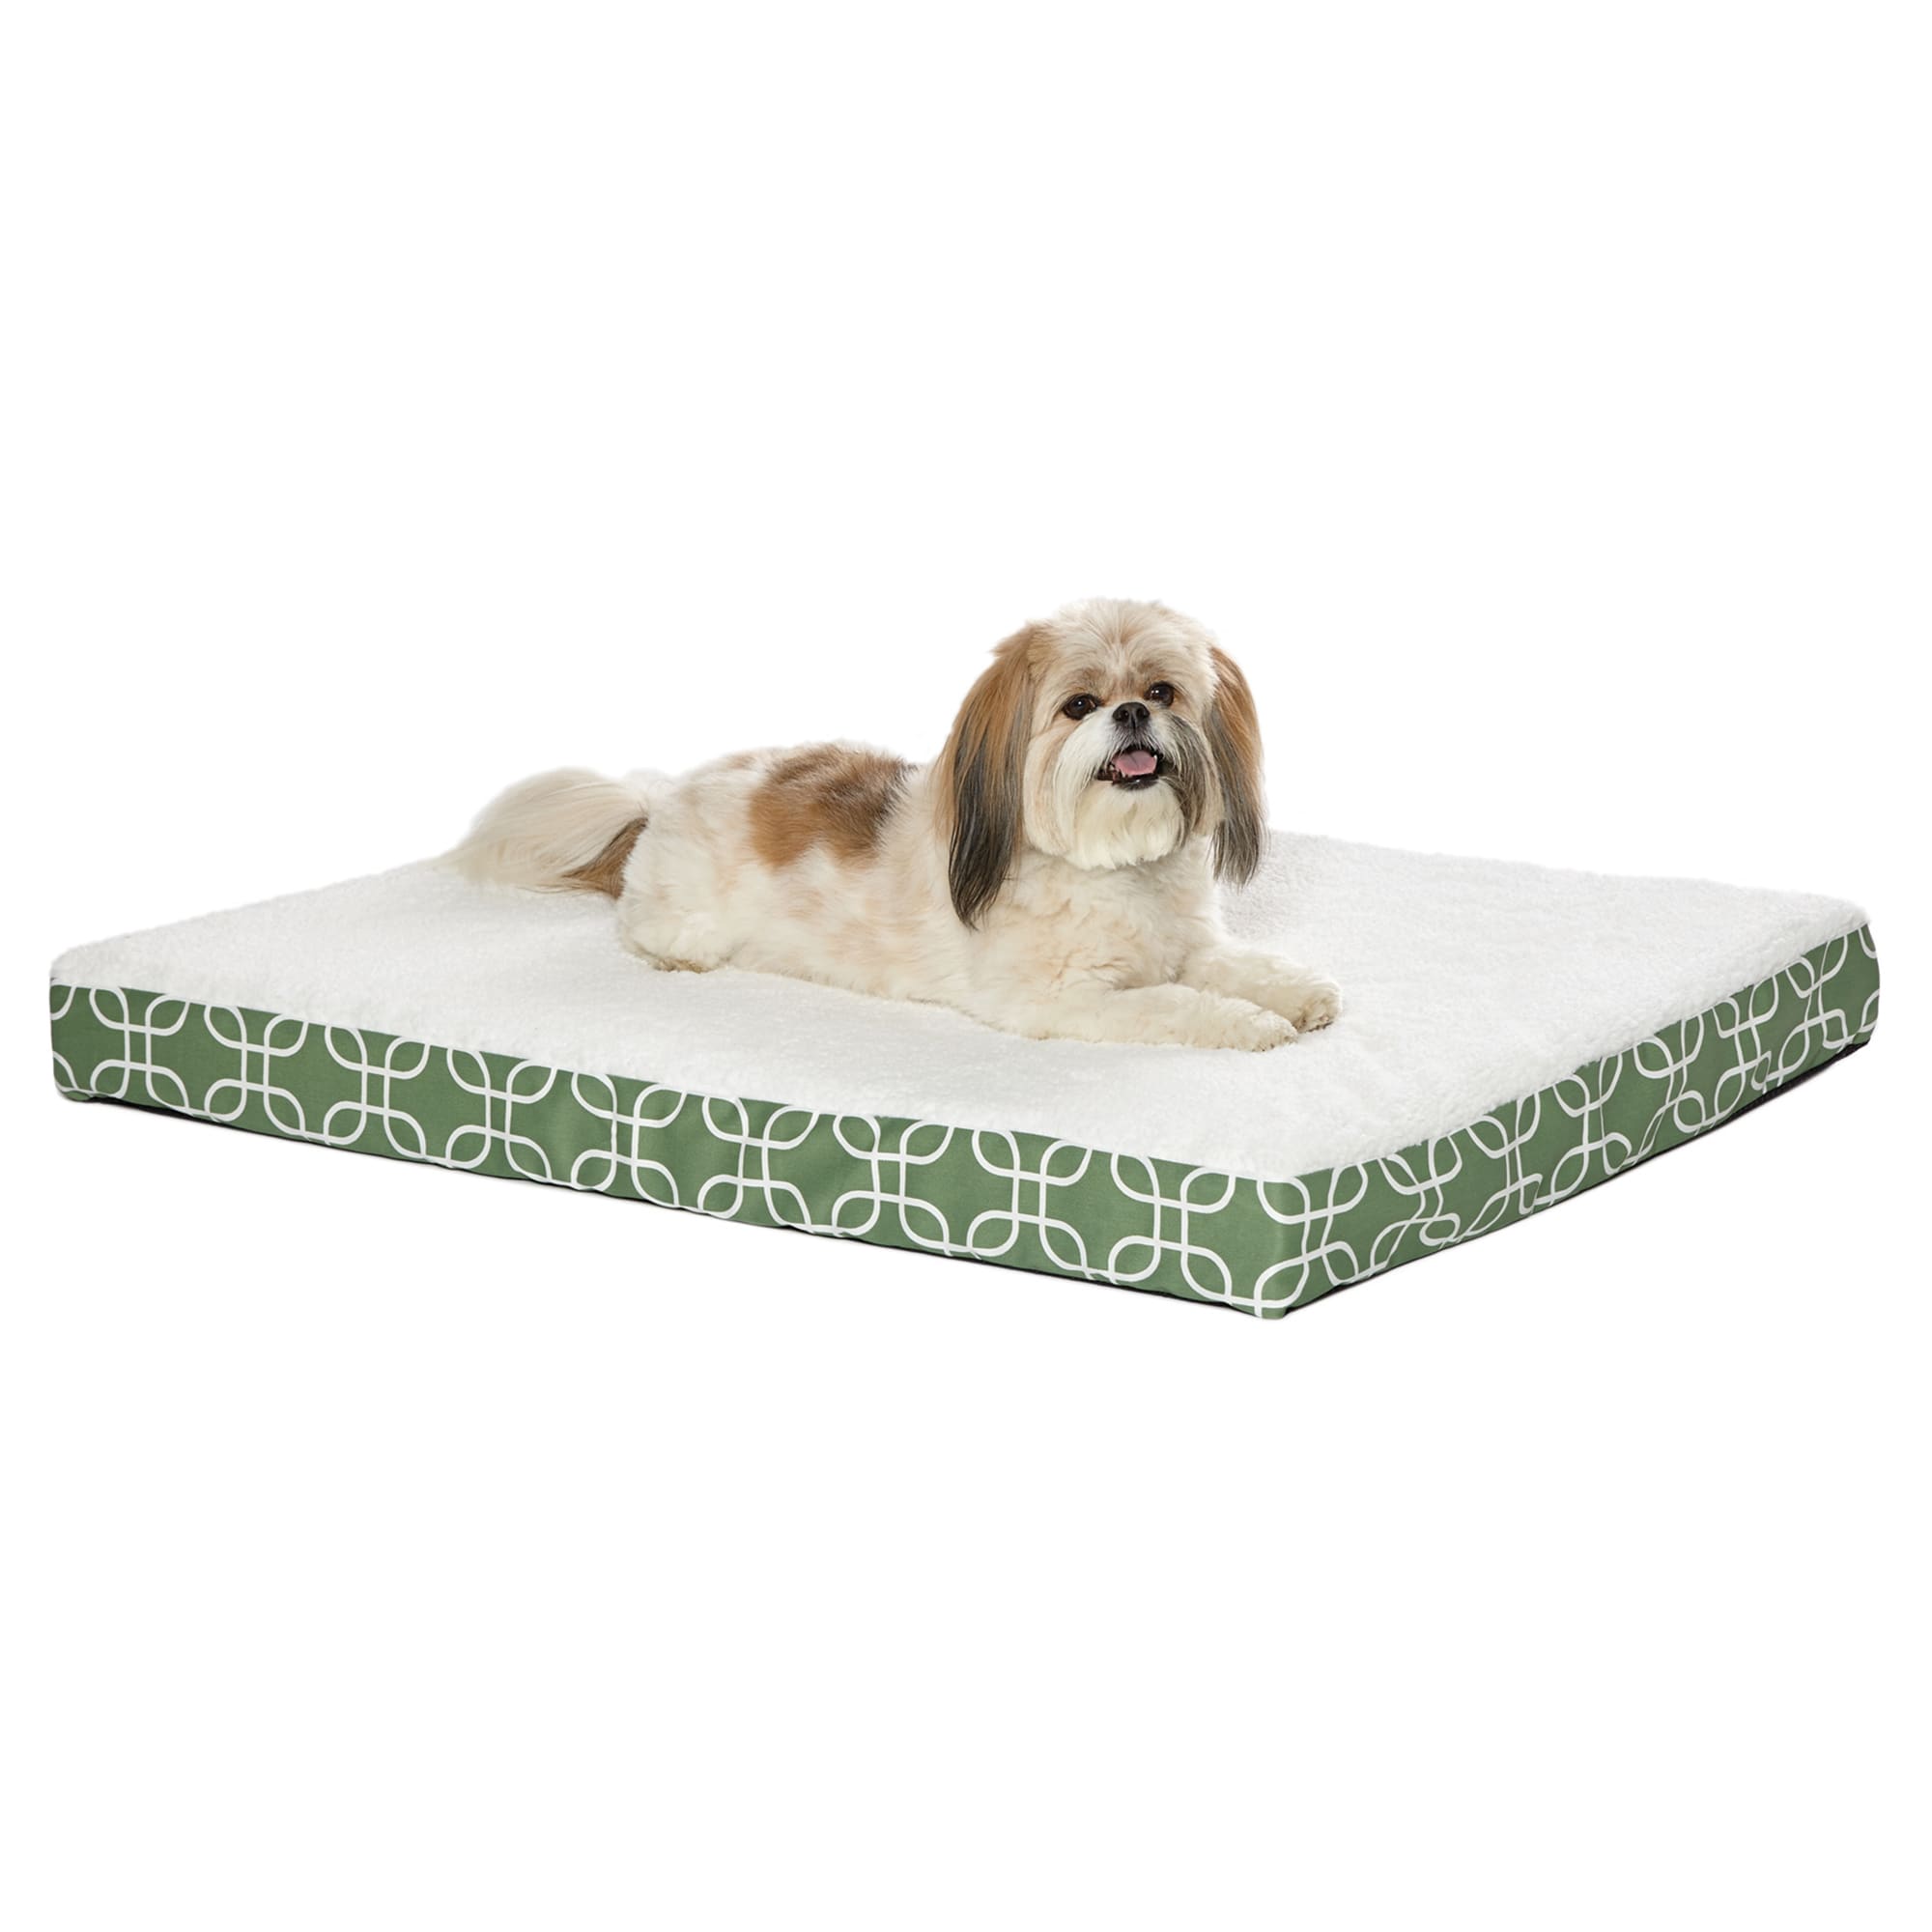 Photos - Dog Bed / Basket Midwest Quiet Time Defender Double Orthopedic Dog Bed, 30.25" L X 